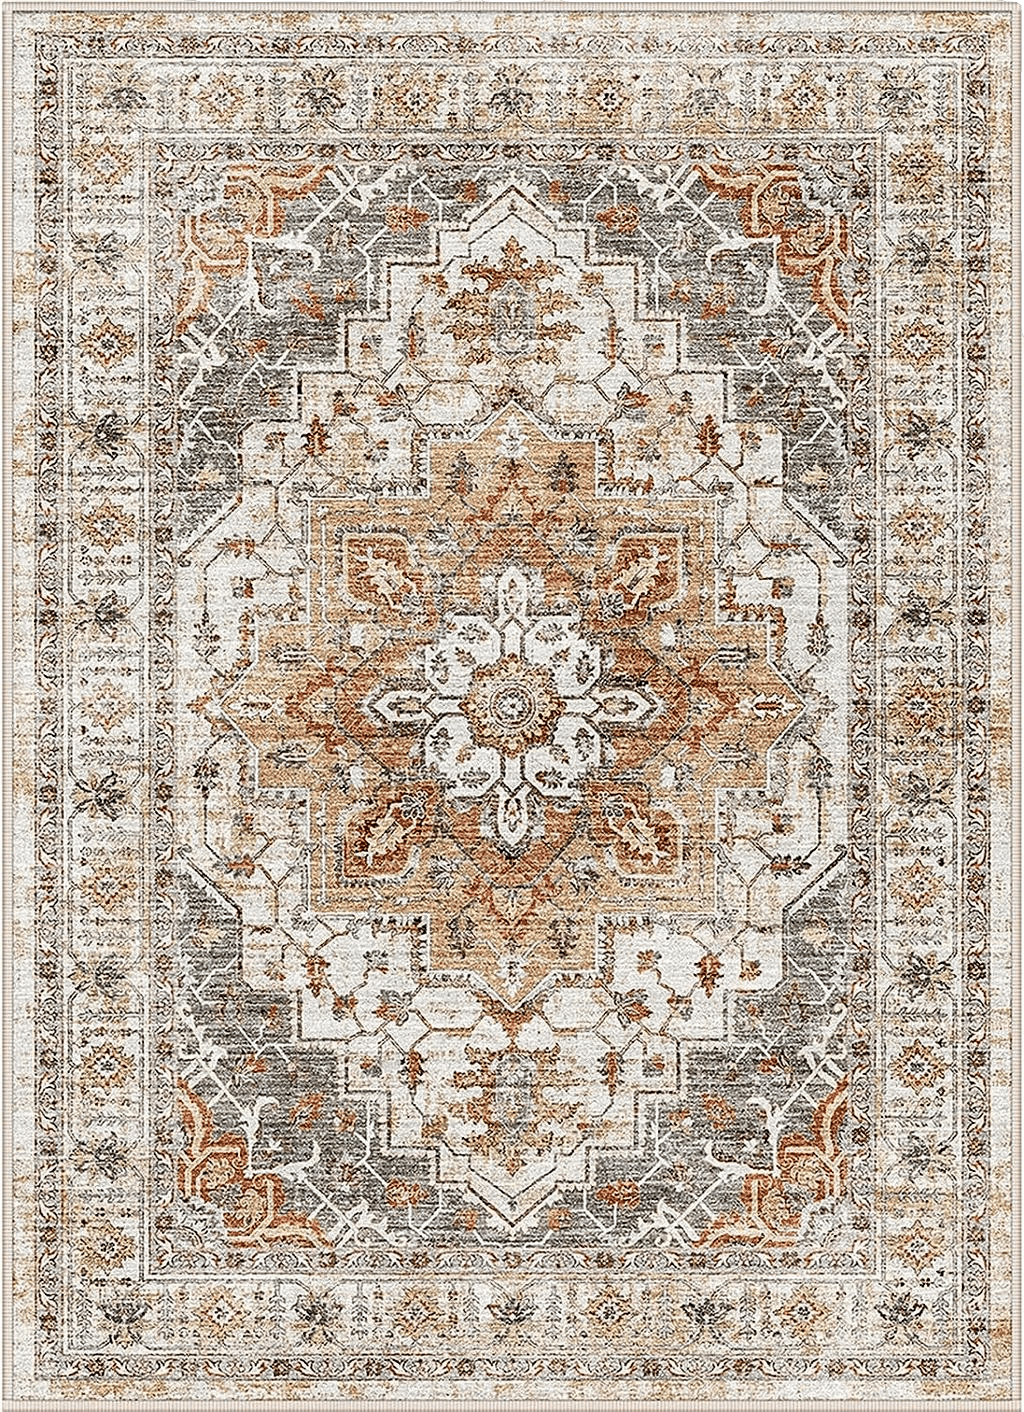 befbee 5x7 Area Rugs for Living Room,Stain Resistant Washable Rug,Non-Slip Backing Rugs for Bedroom,Kitchen,Printed Vintage Home Decor Rug (Turmeric/Grey, 5'x7')